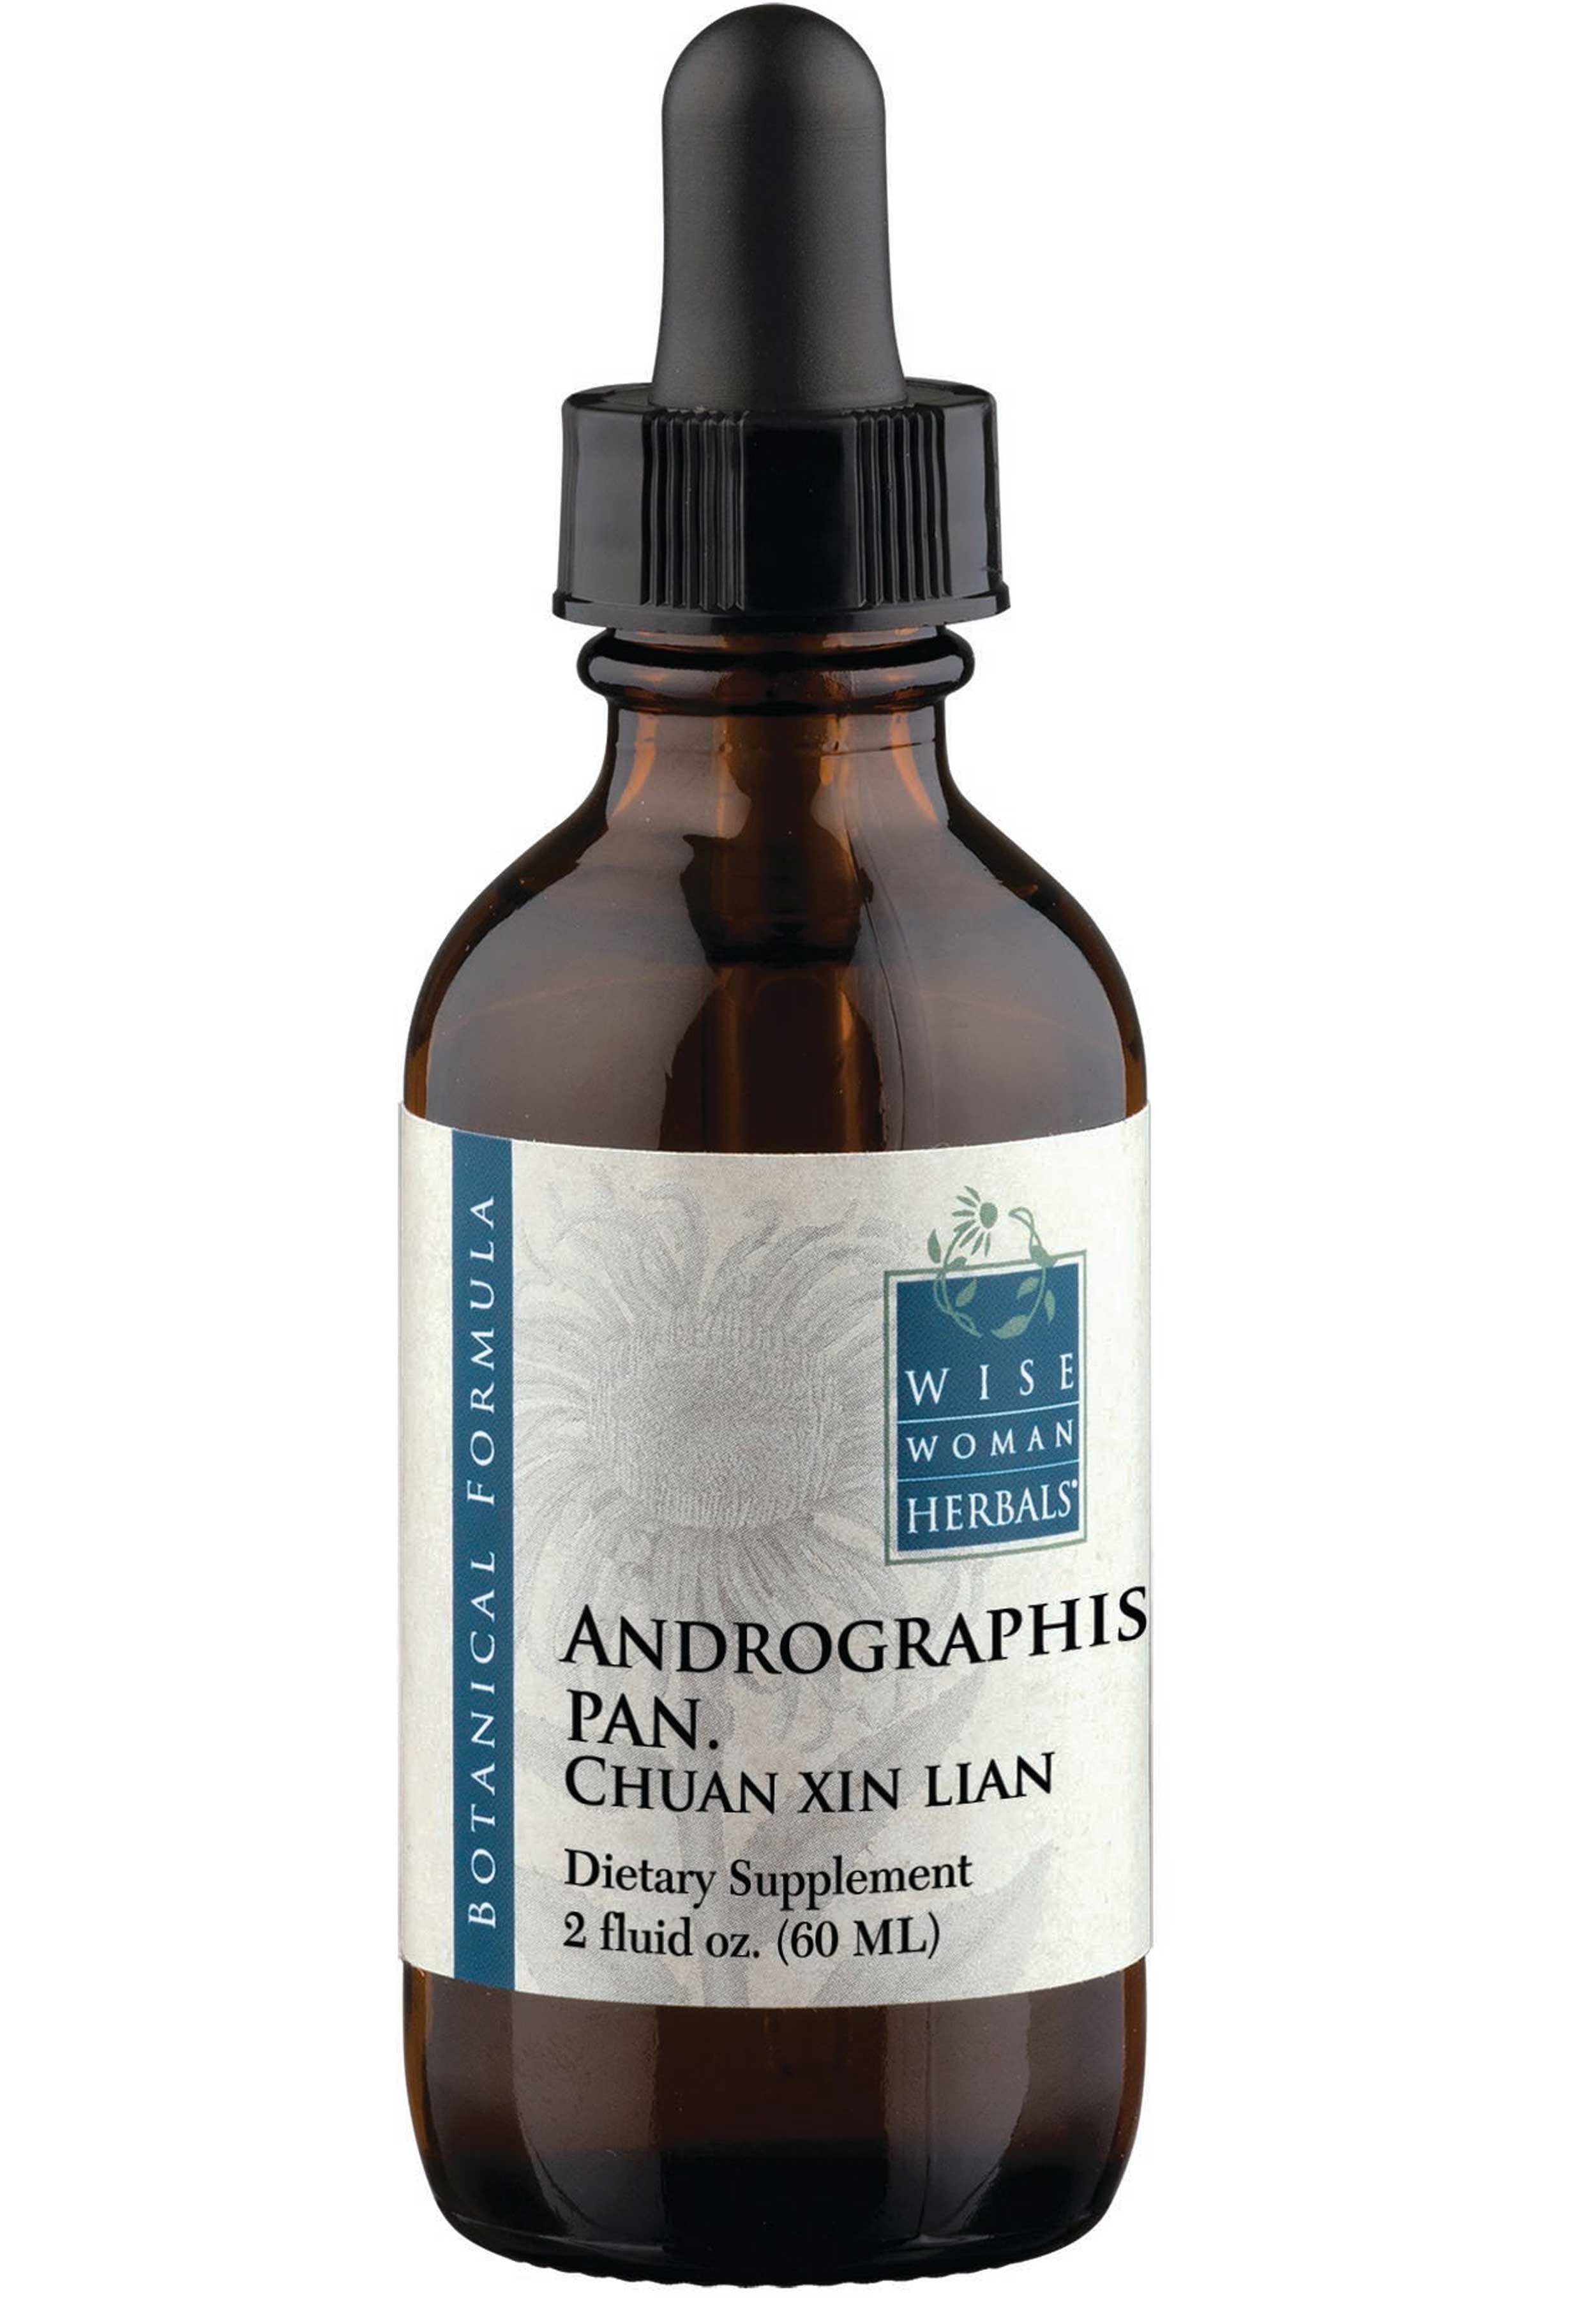 Wise Woman Herbals Andrographis Paniculata Chuan Xin Lian